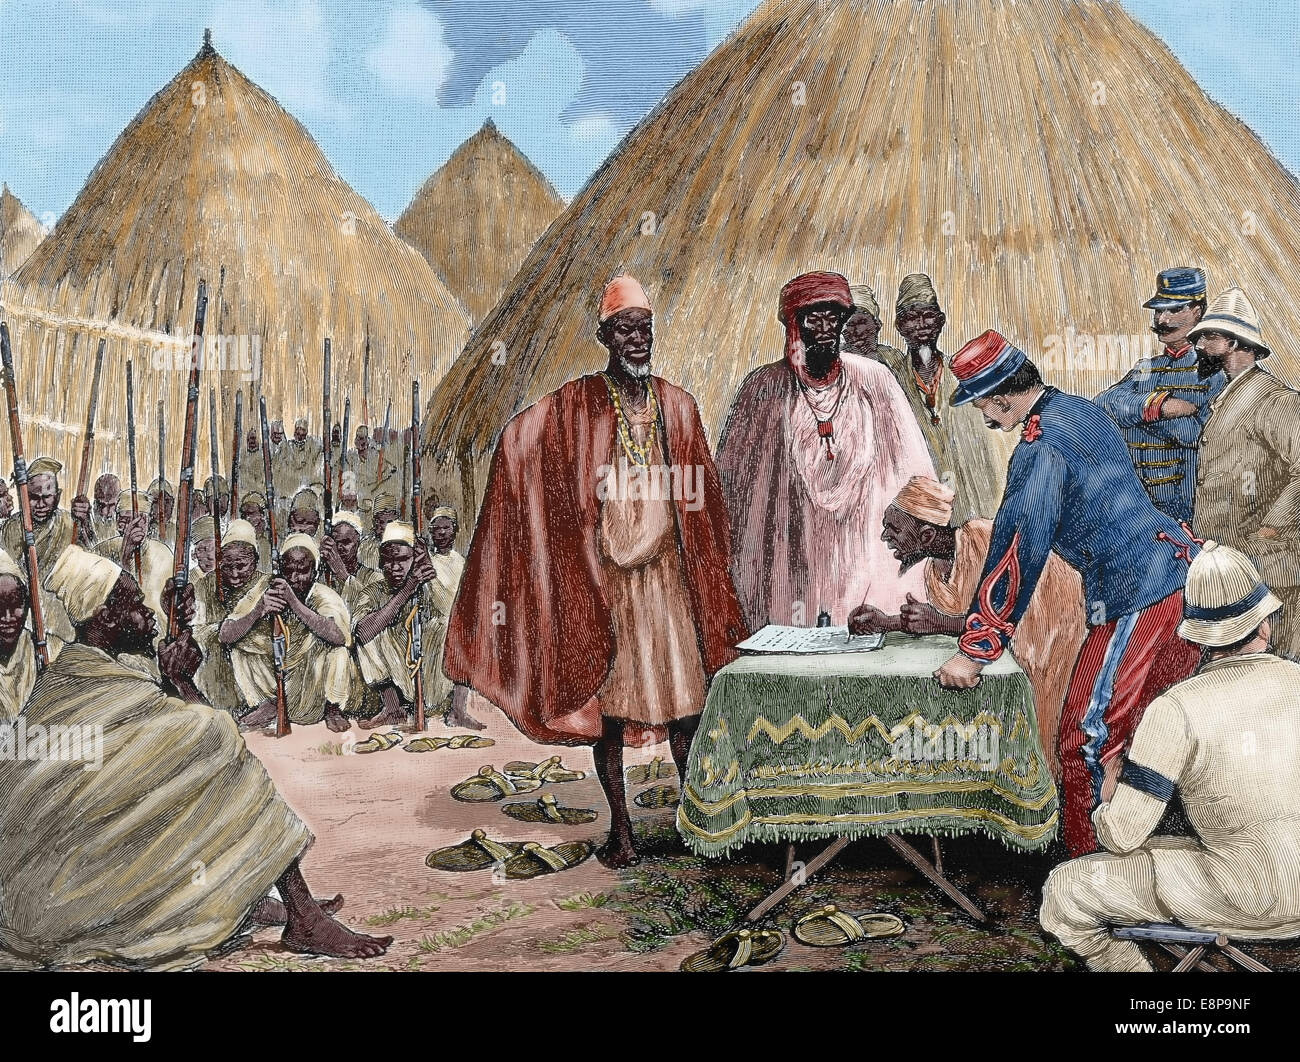 Africa. Signing a treaty between French colonists and the heads of the Kingdom of Tamisso. Engraving, 1892. Colored. Stock Photo